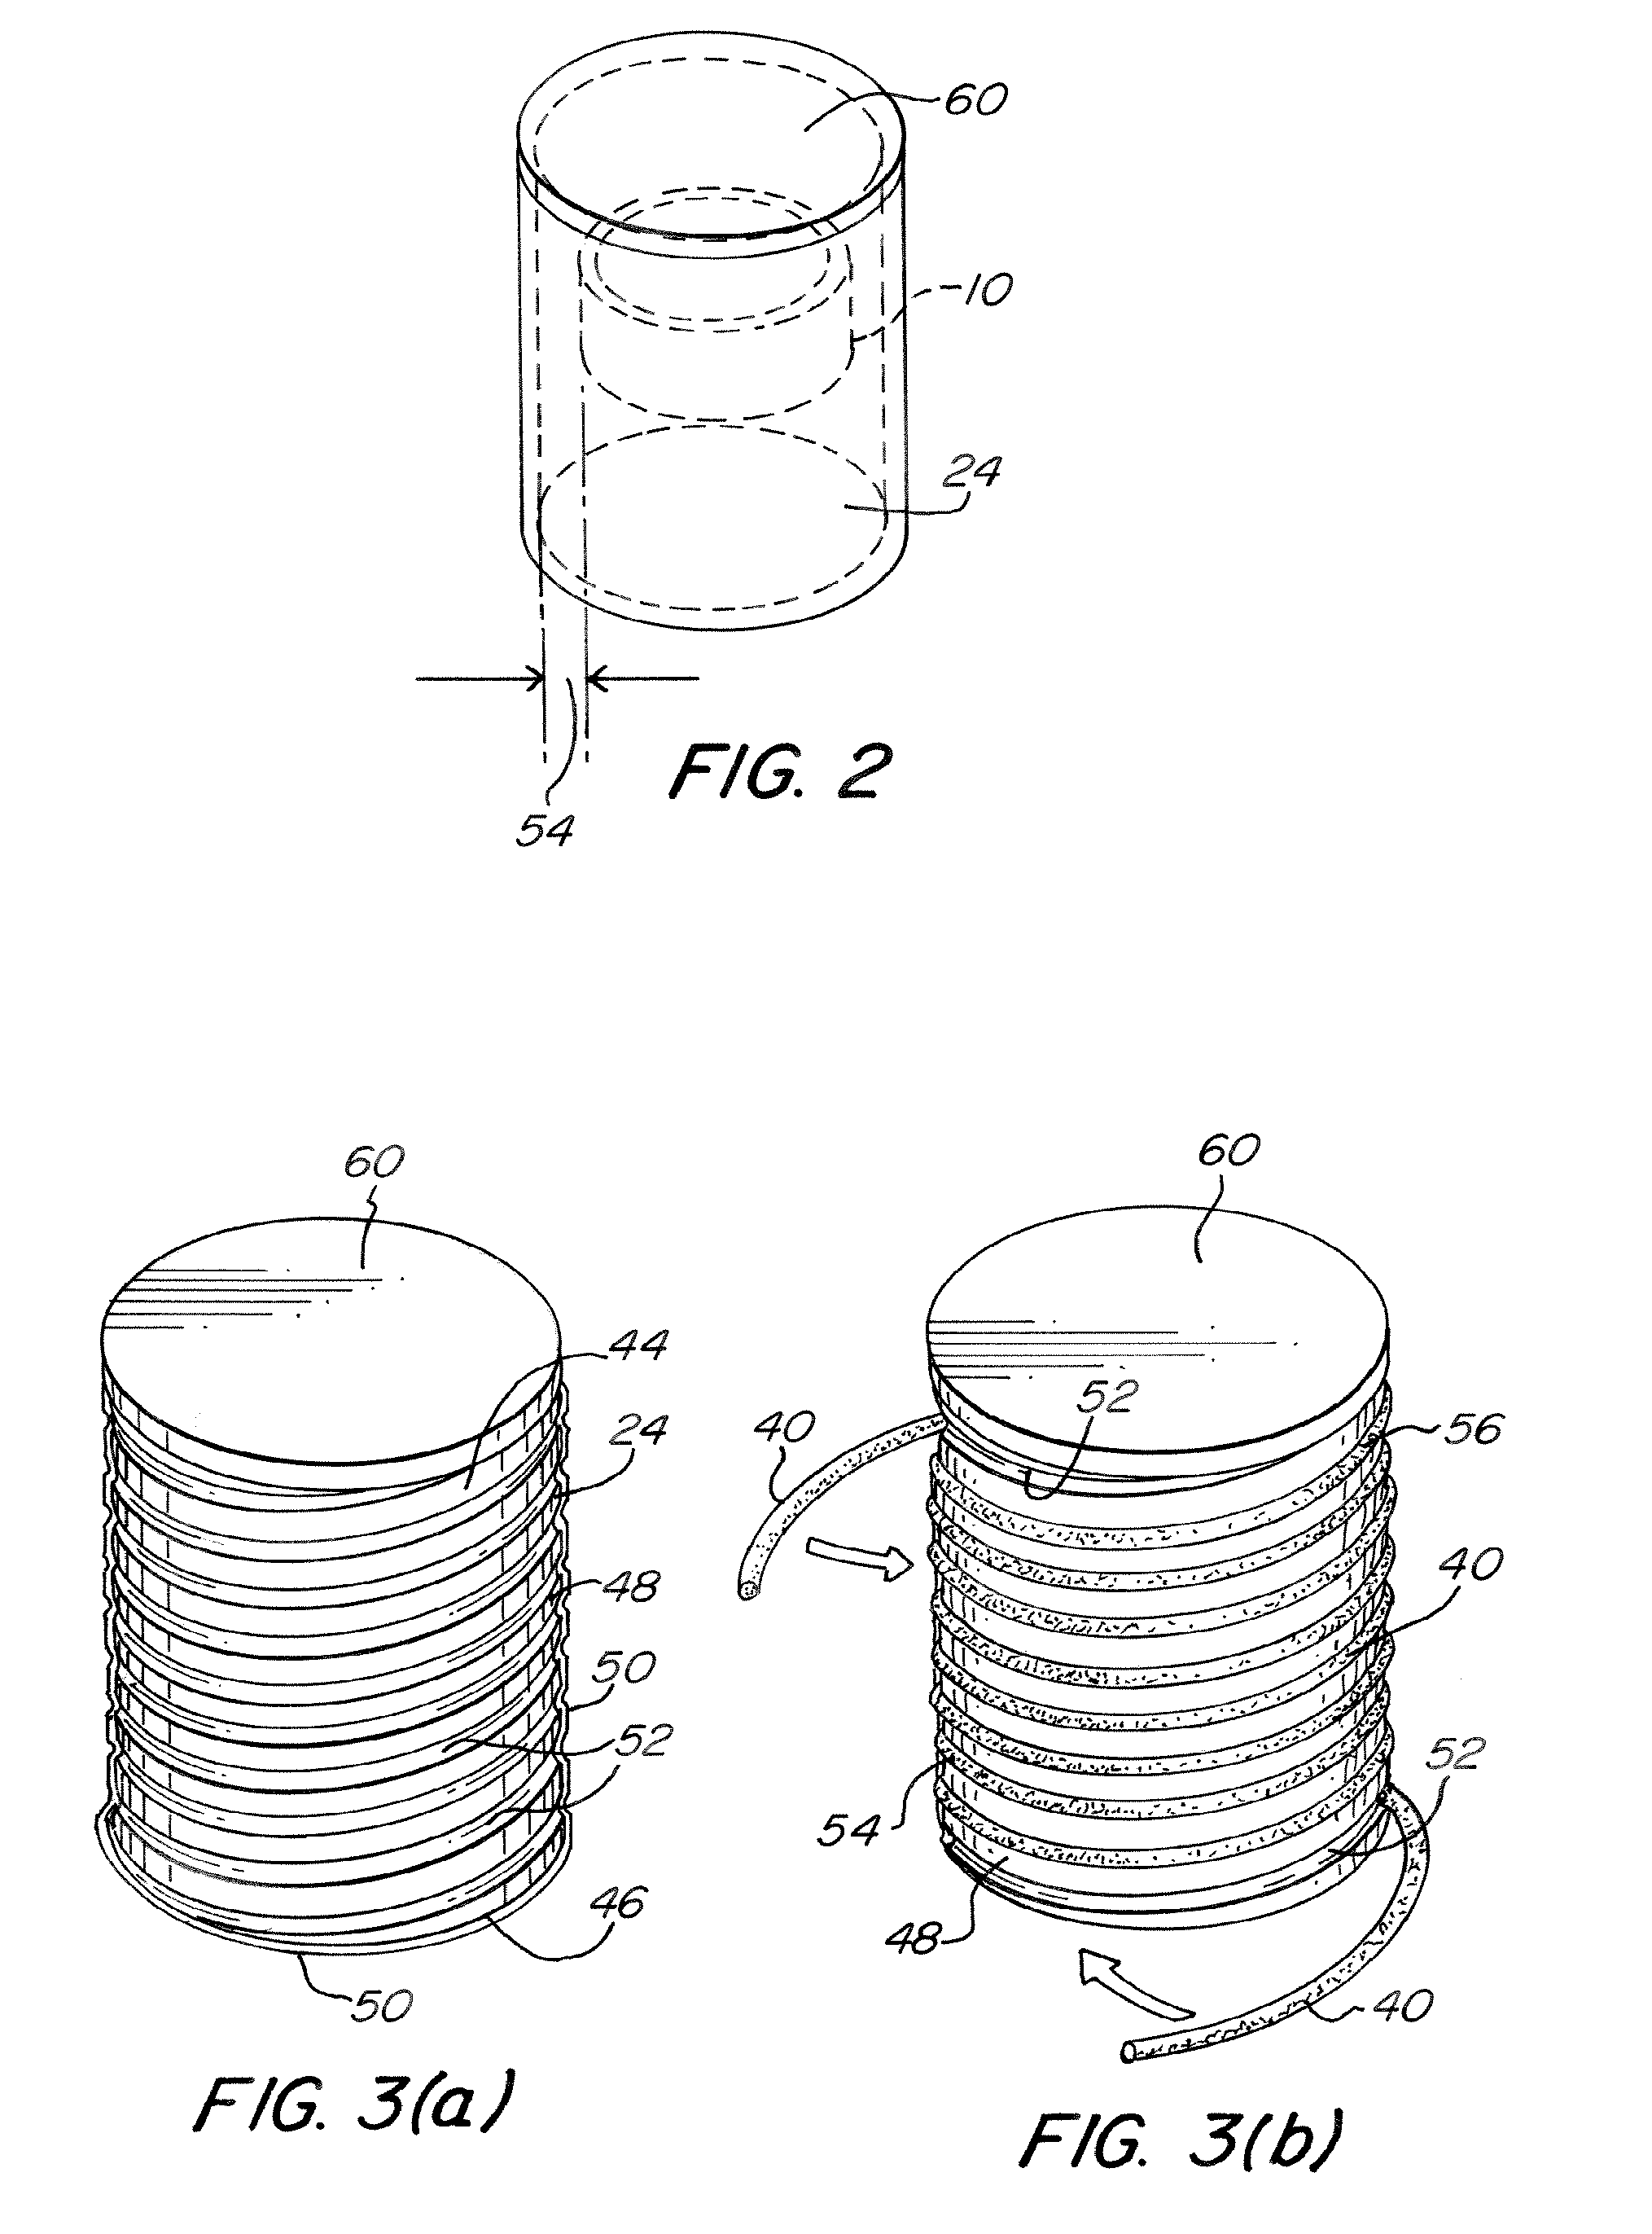 Differential scanning calorimeter (DSC) with temperature controlled furnace